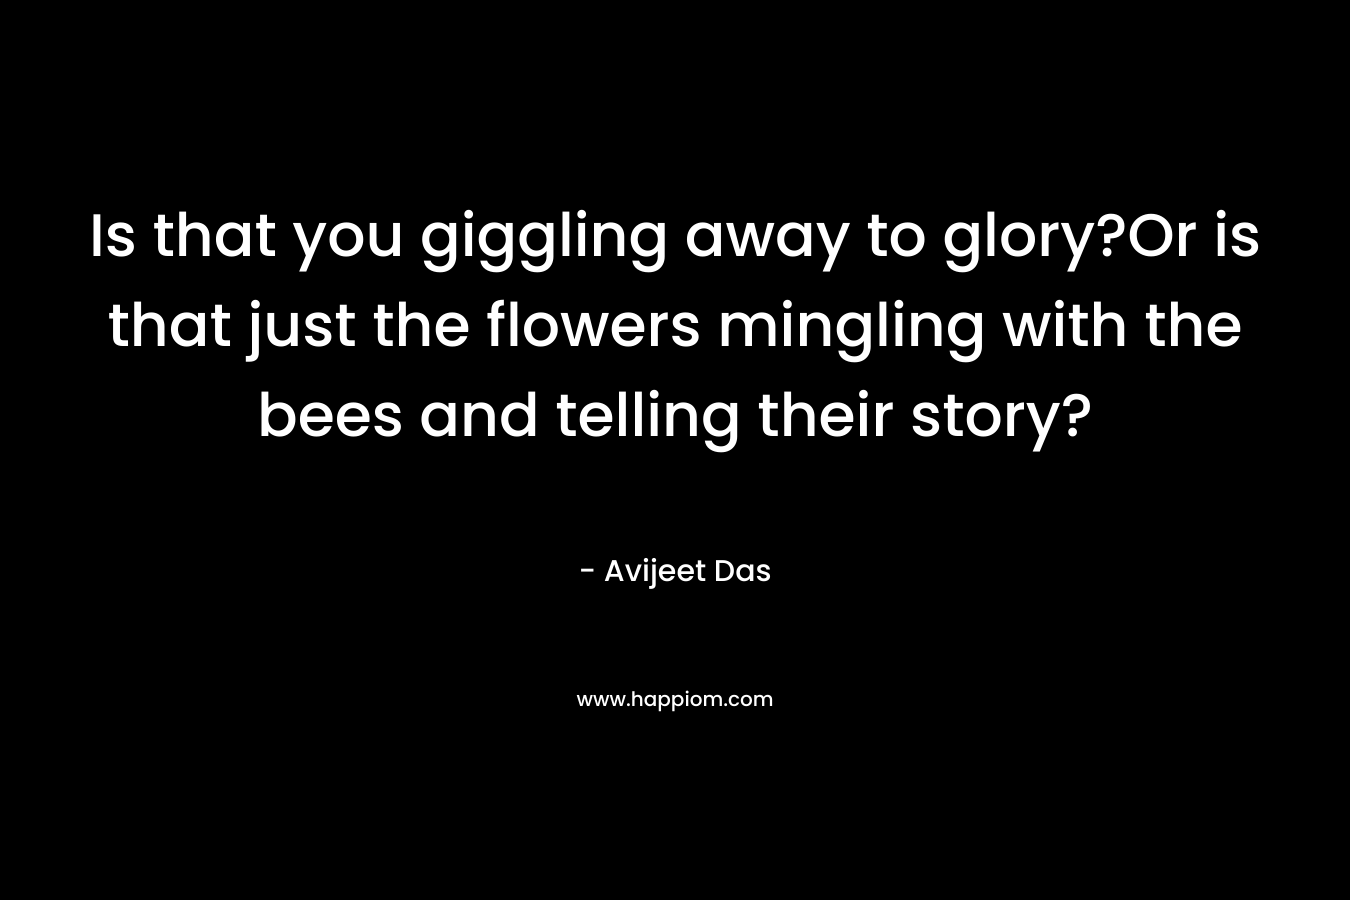 Is that you giggling away to glory?Or is that just the flowers mingling with the bees and telling their story?